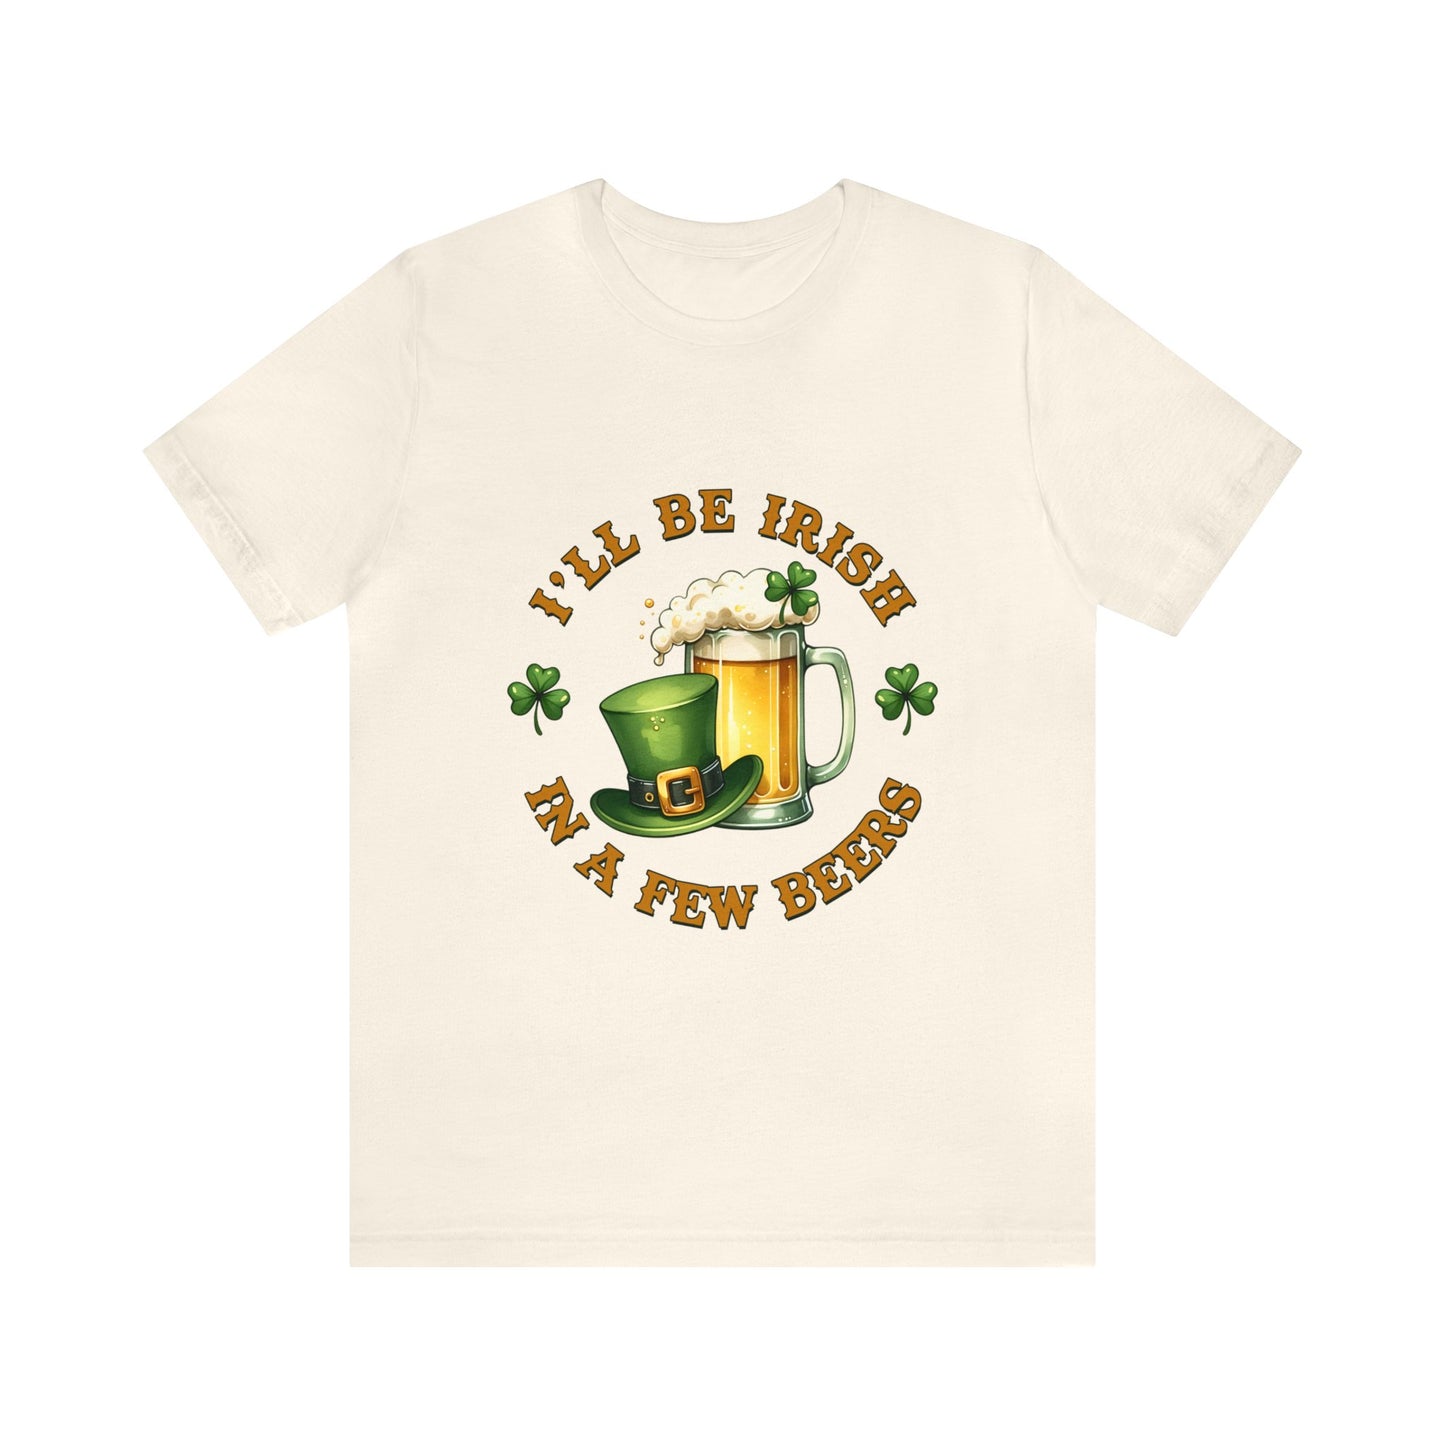 Irish in a few beers funny St. Patrick's Day Adult Unisex Tshirt